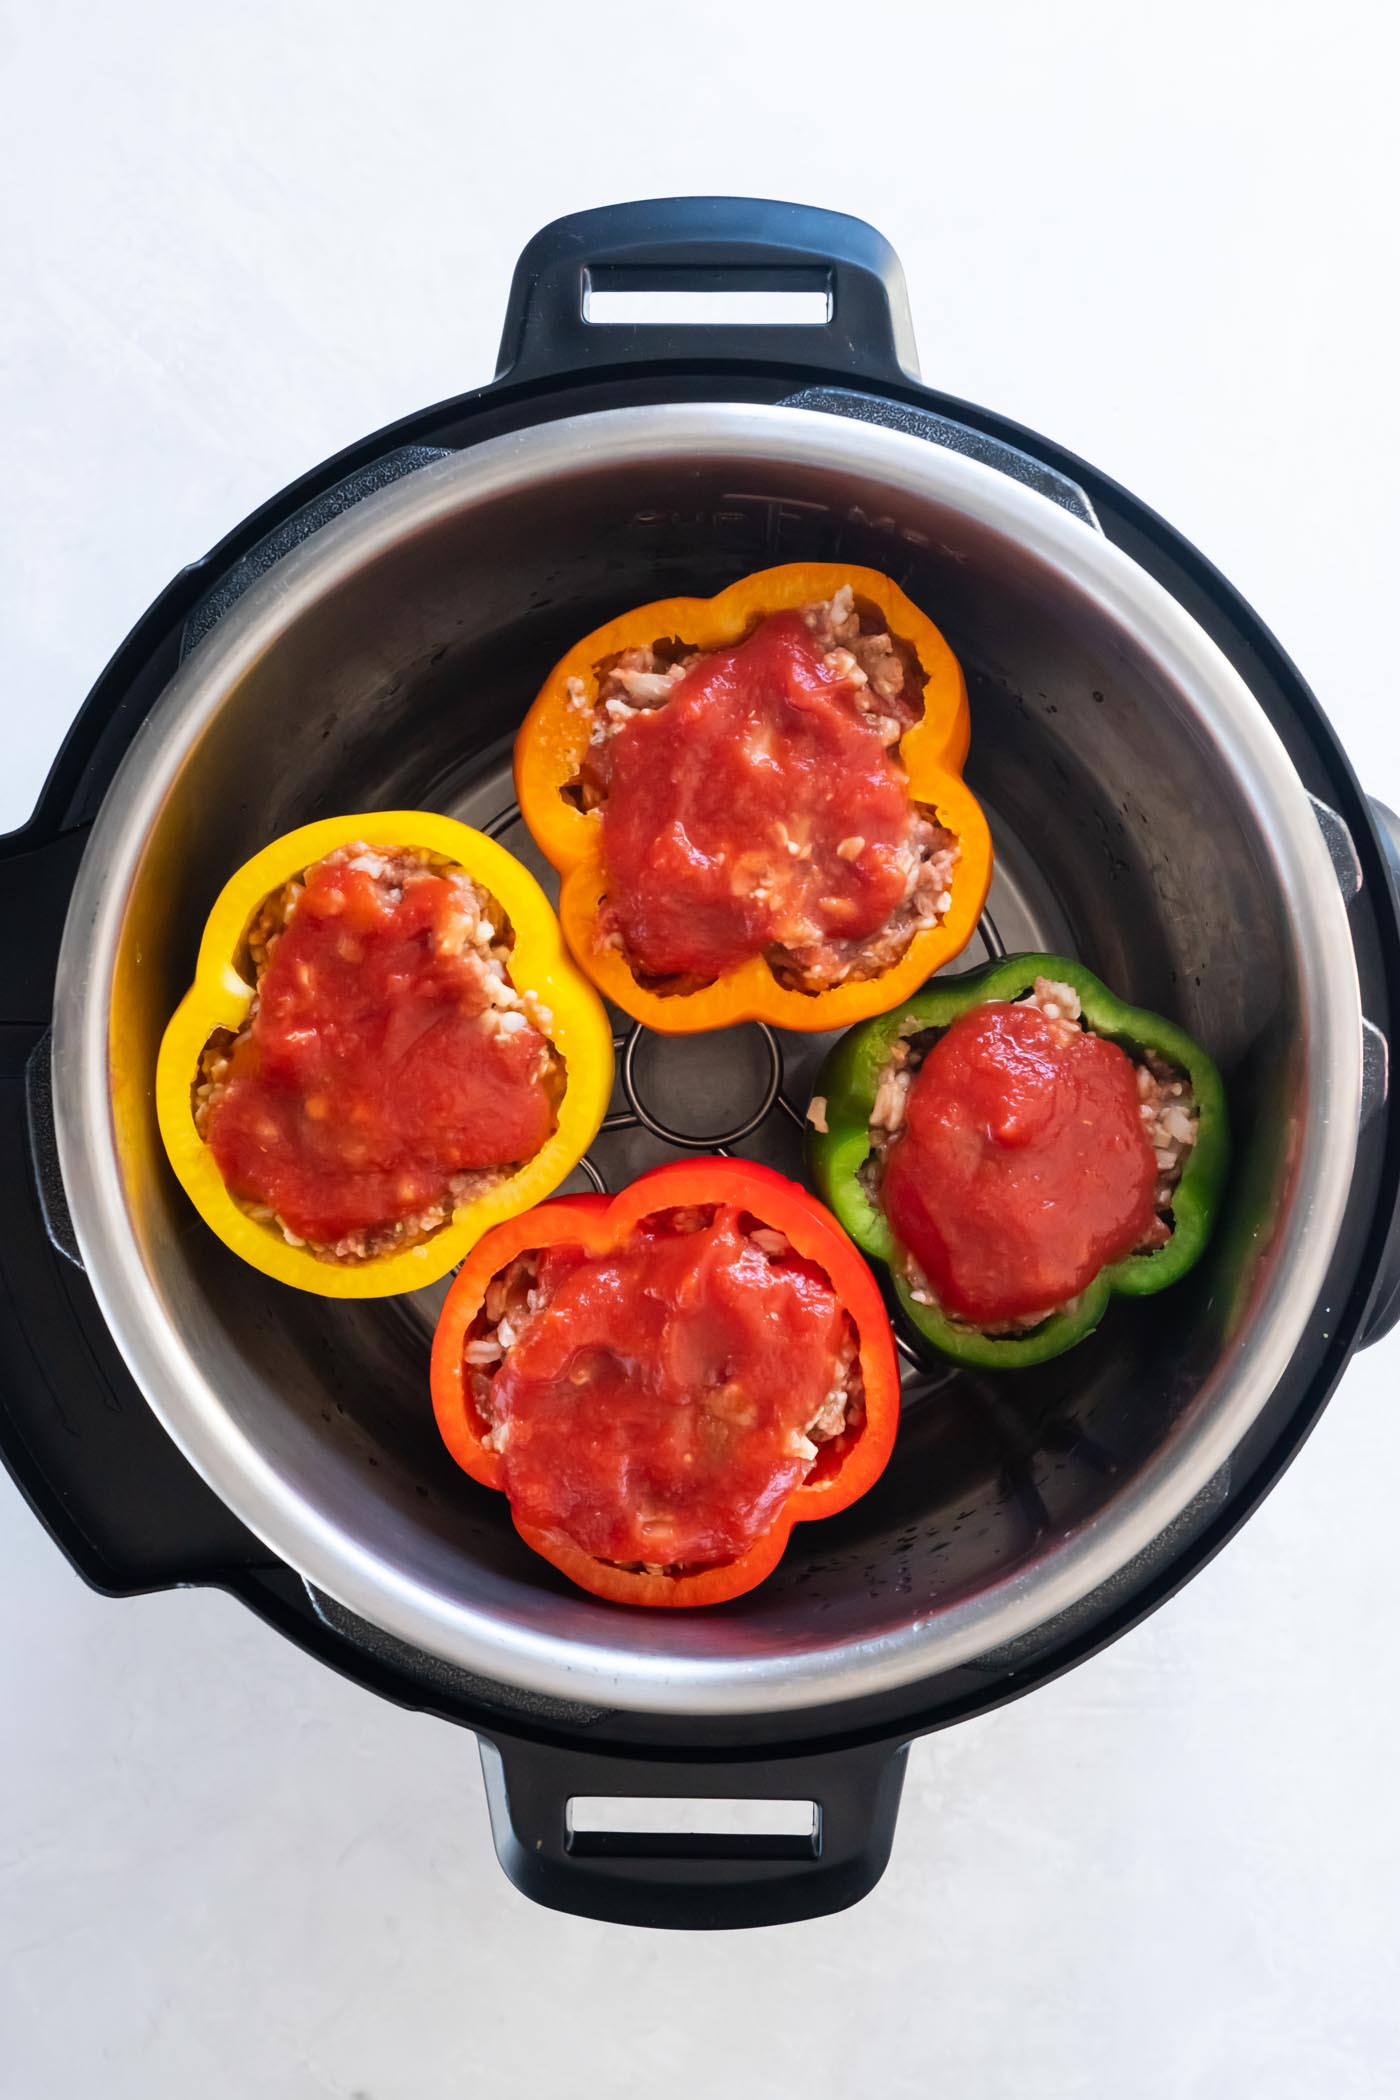 Uncooked stuffed peppers in instant pot with tomato sauce on top.